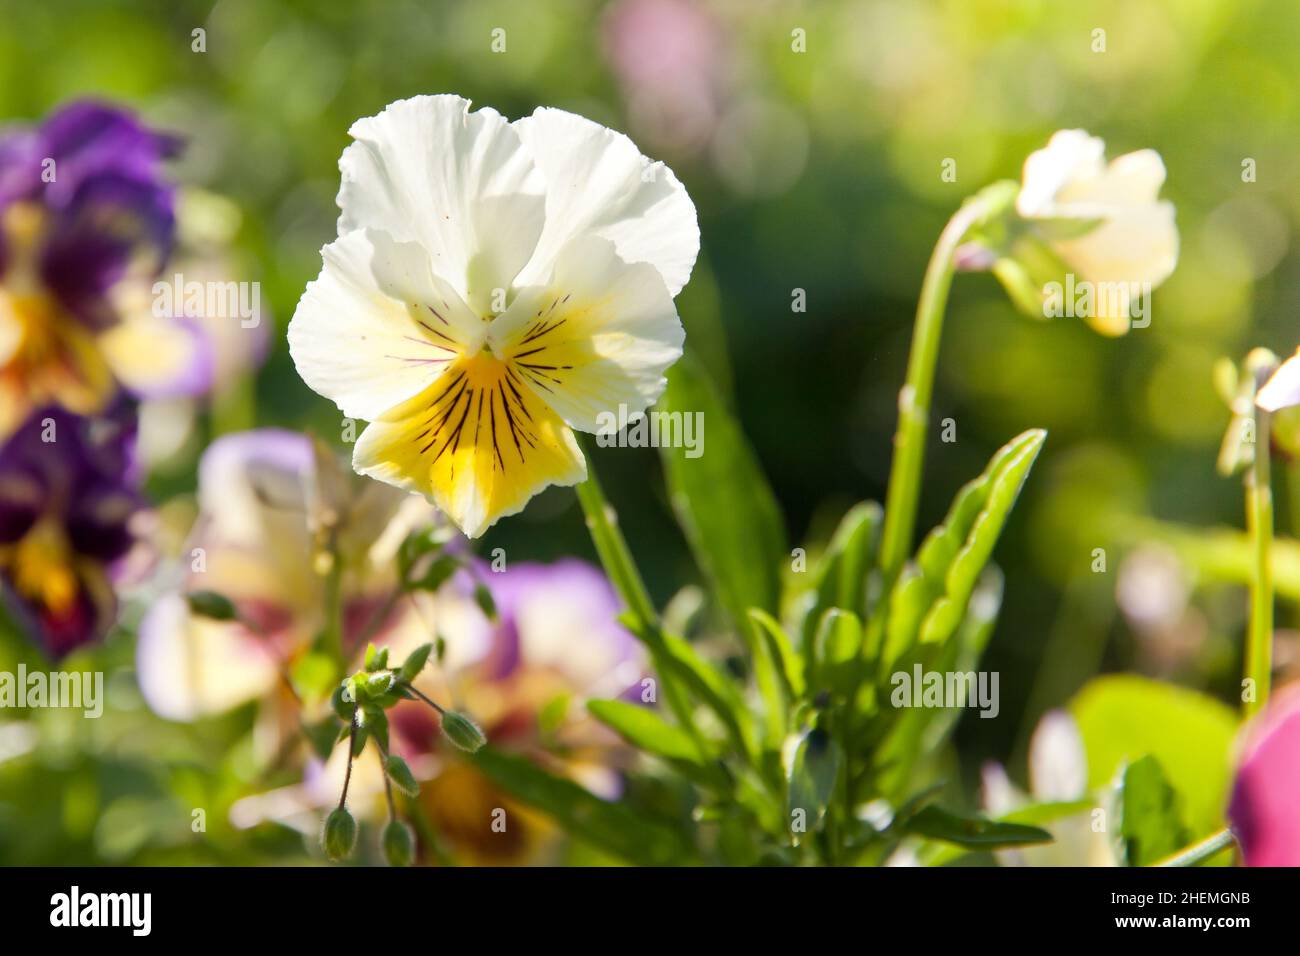 Pansy flowers in a flower bed on a sunny day. Robust and blooming. Garden pansy with purple and white petals. Hybrid pansy. Viola tricolor pansy in fl Stock Photo